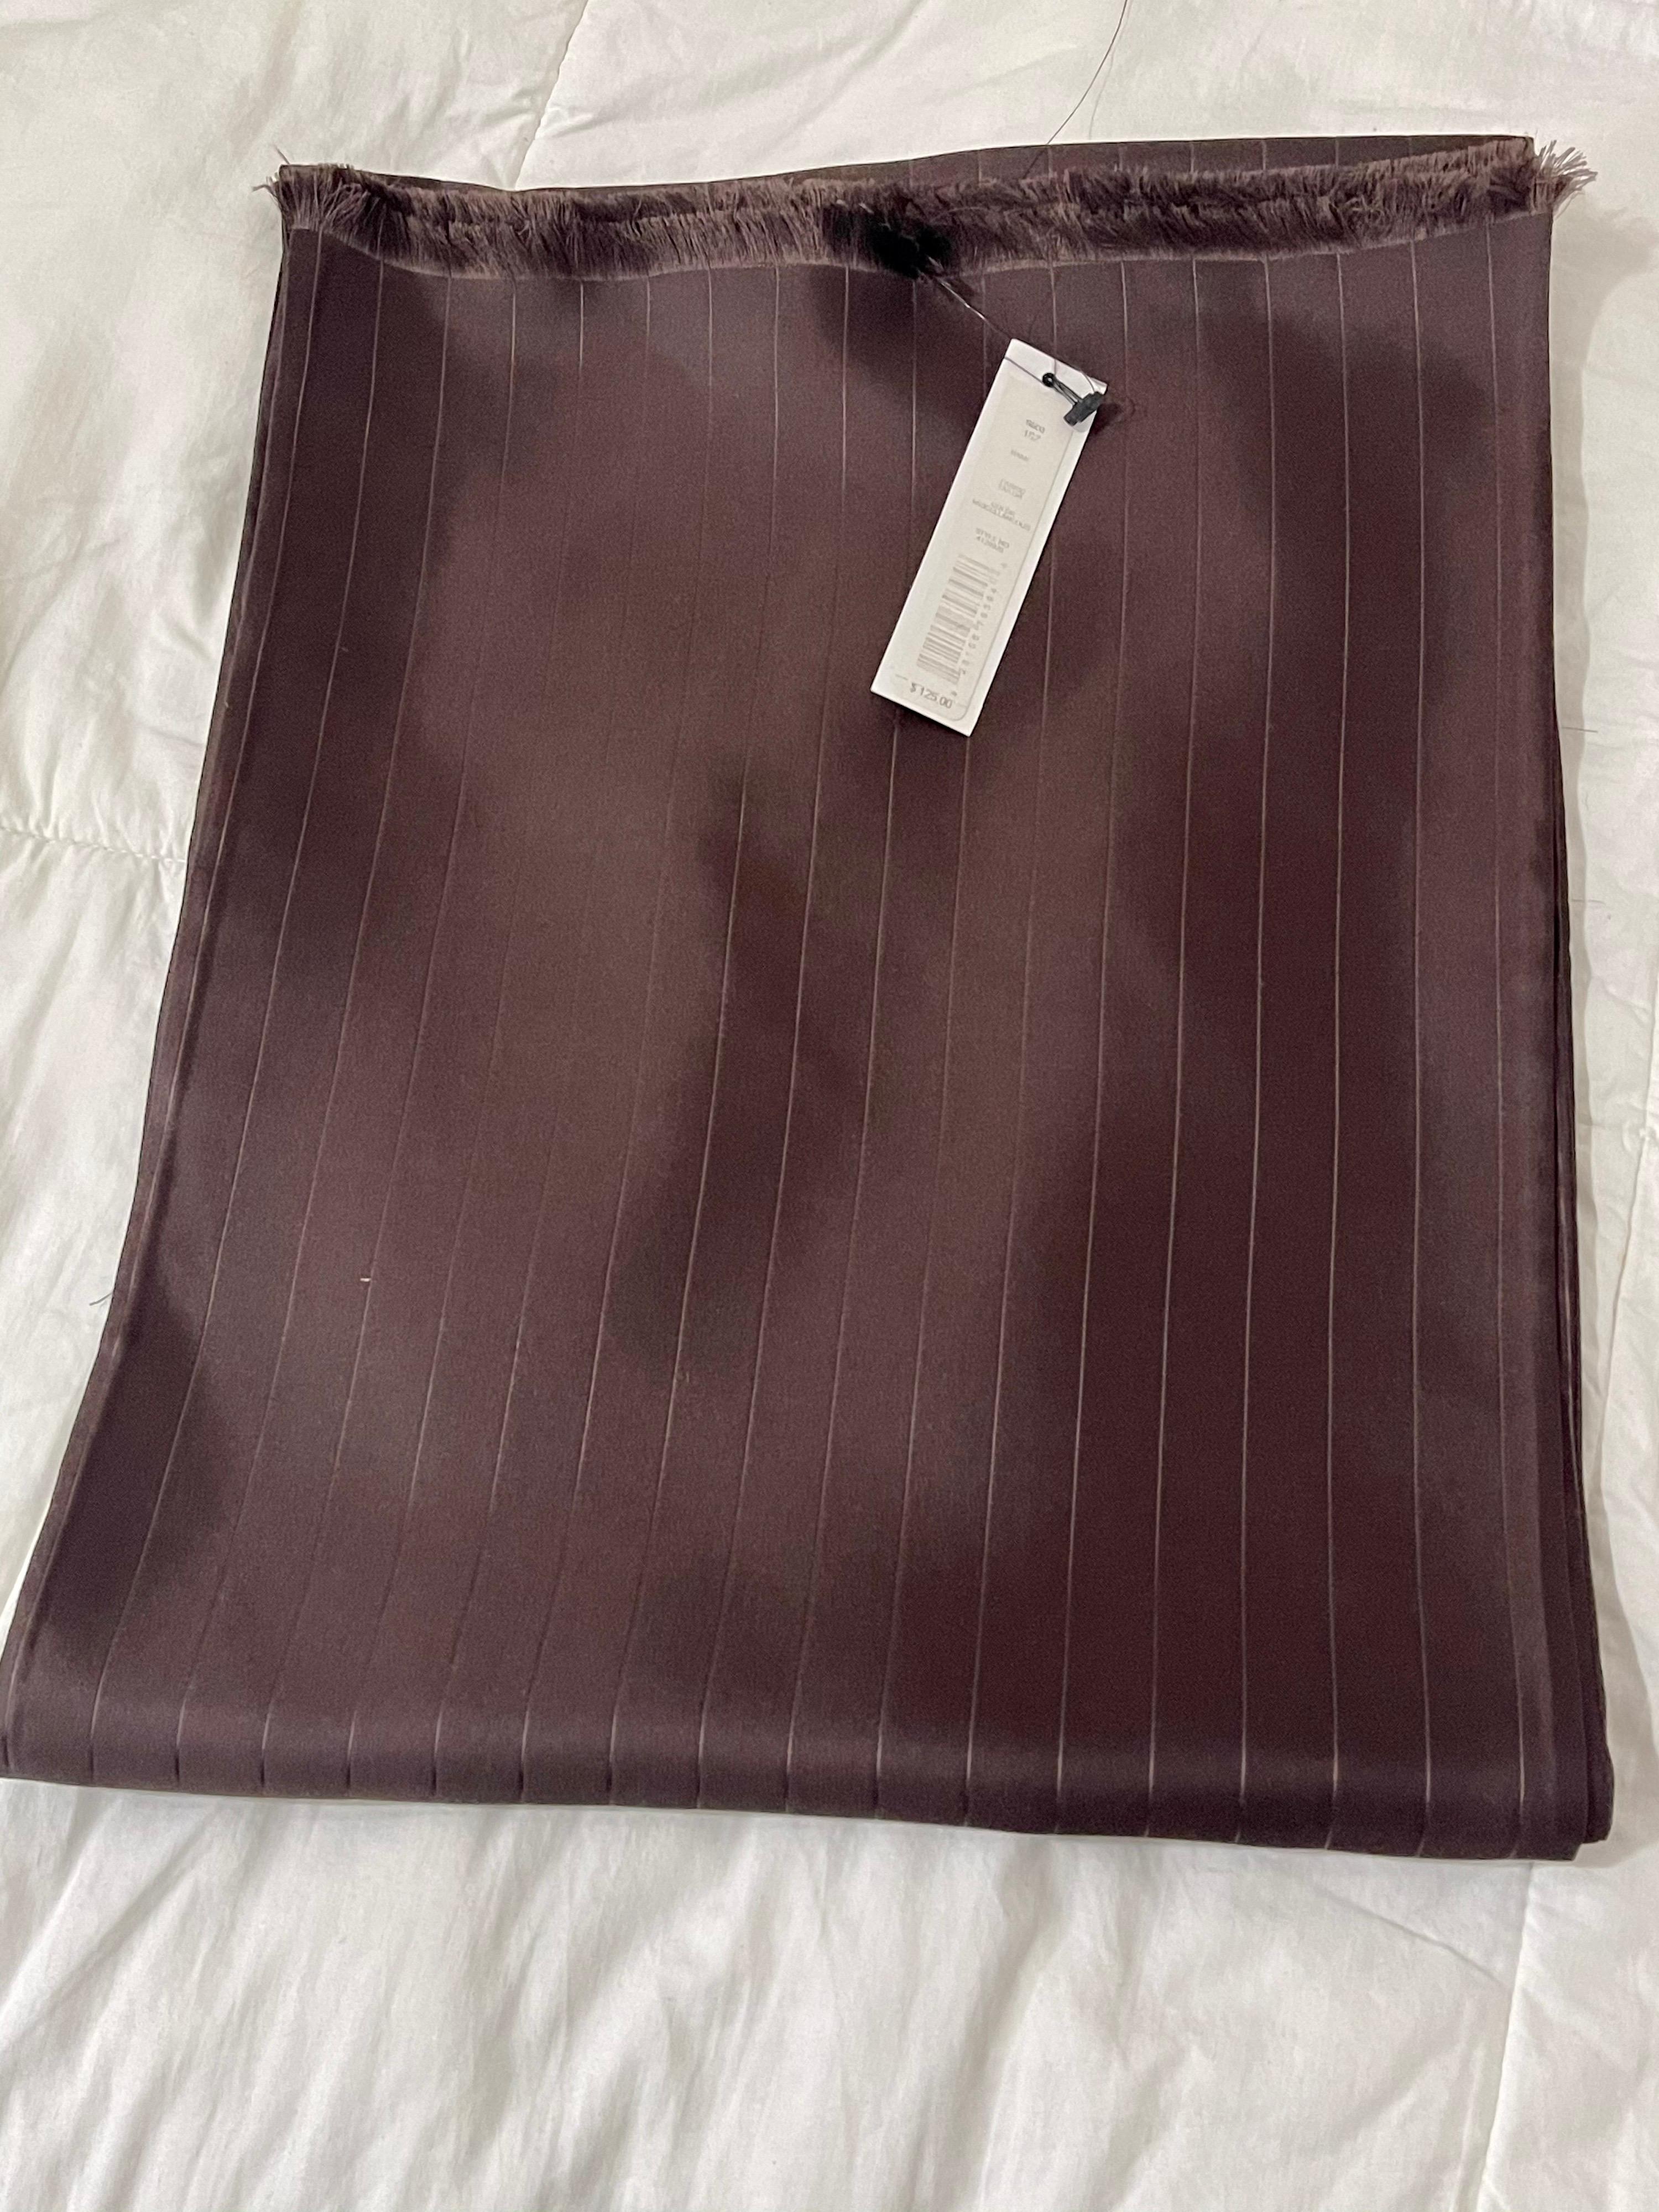 Description

Pattern Type: Stripes 
Department Name: Adult
Scarves Type: Scarf
Style: Fashion
Gender : Men
Brand Name: Theory 
Material:Silk
Model Number:  4129925
Scarves Length: 60 Inches 
colour: brown 
suitable for season: spring, summer,autumn,